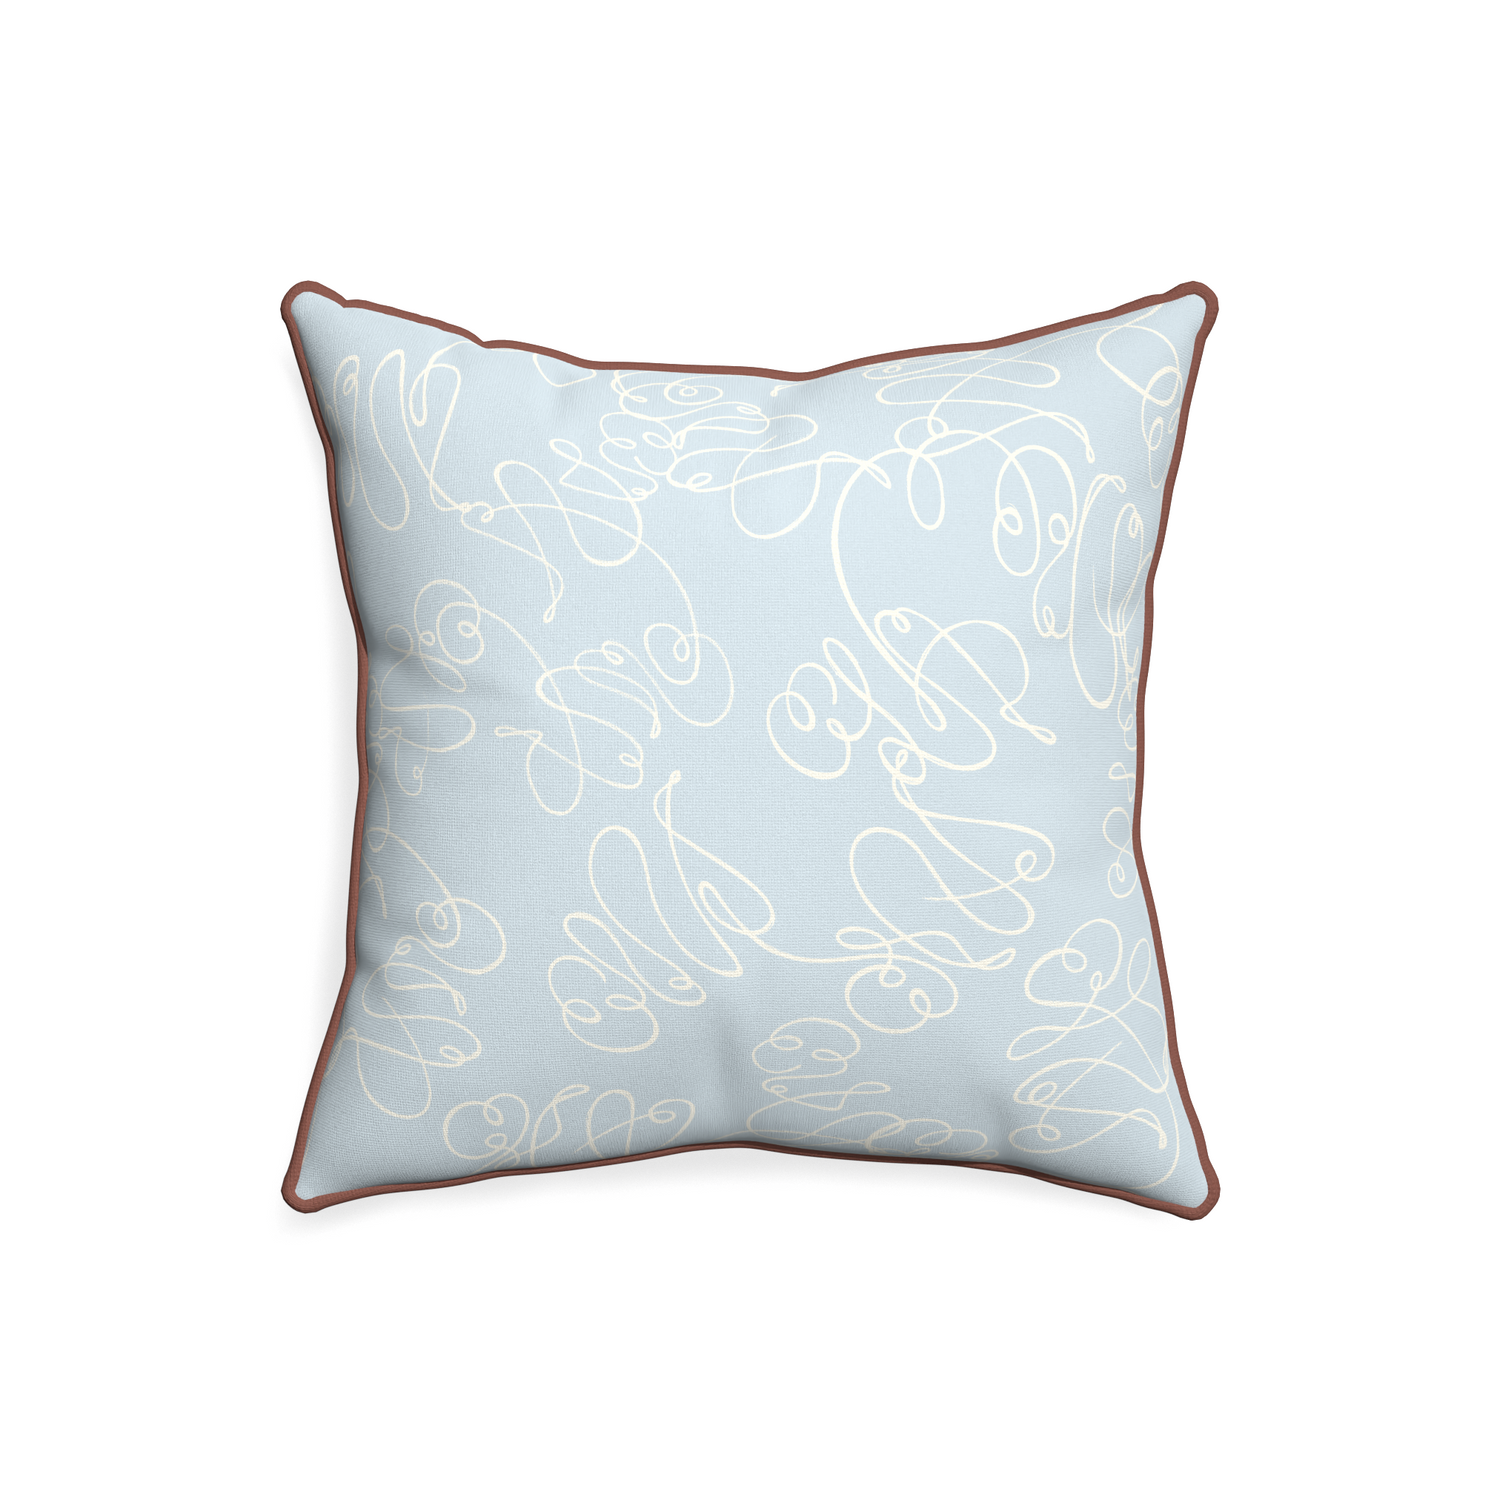 20-square mirabella custom powder blue abstractpillow with w piping on white background